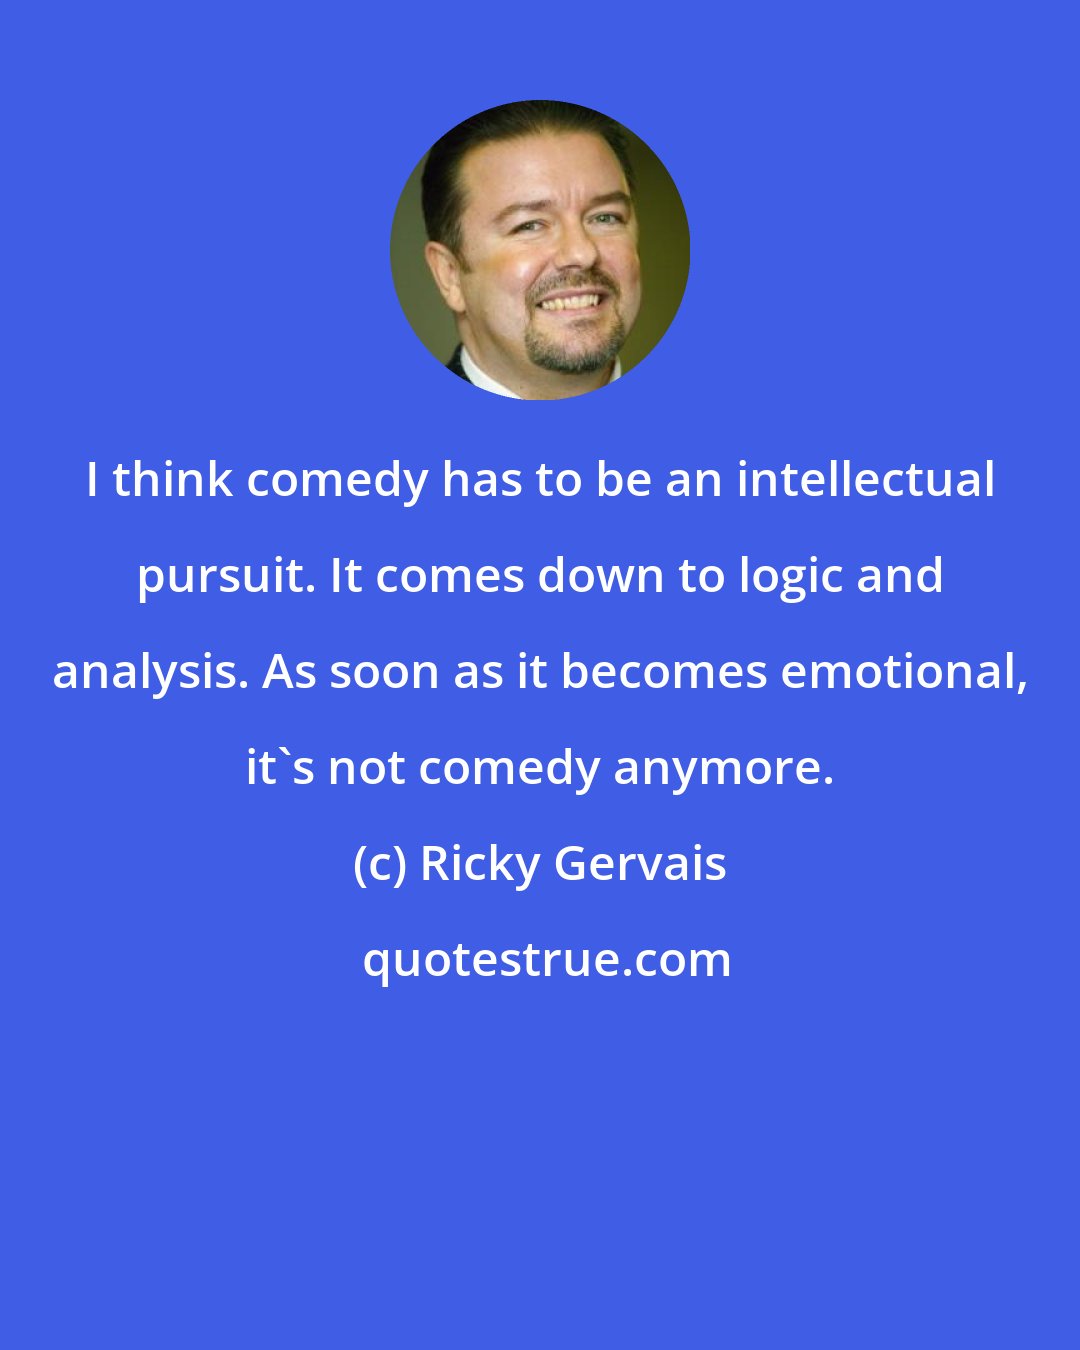 Ricky Gervais: I think comedy has to be an intellectual pursuit. It comes down to logic and analysis. As soon as it becomes emotional, it's not comedy anymore.